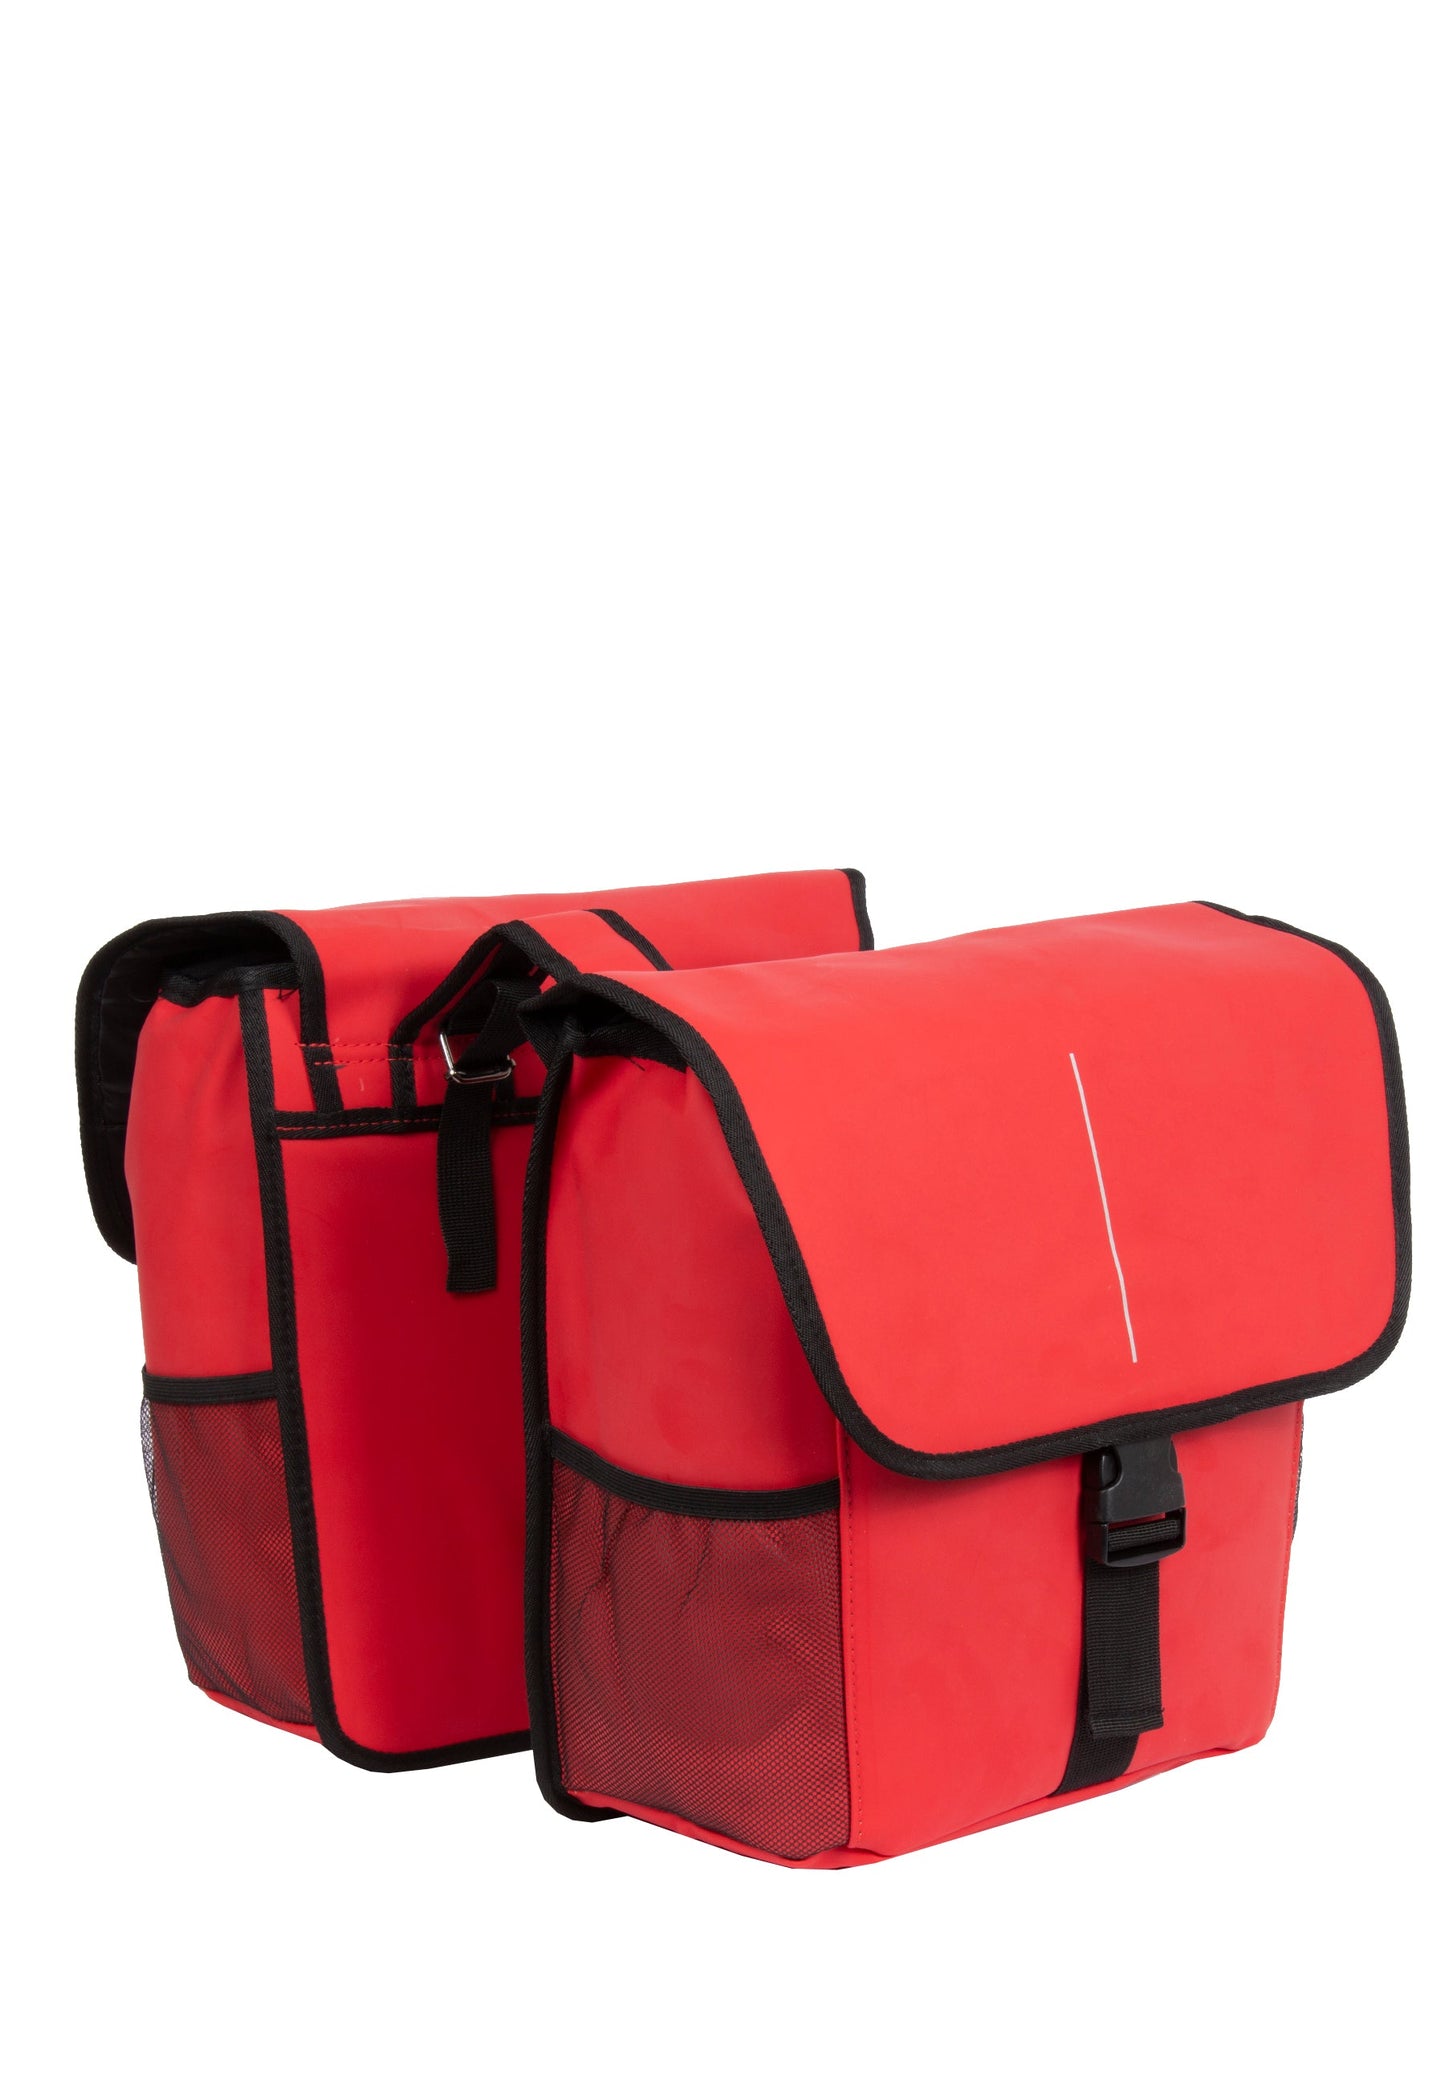 Satteltasche 63.1012 von New Rebels Bike Collection - Laure Bags and Travel